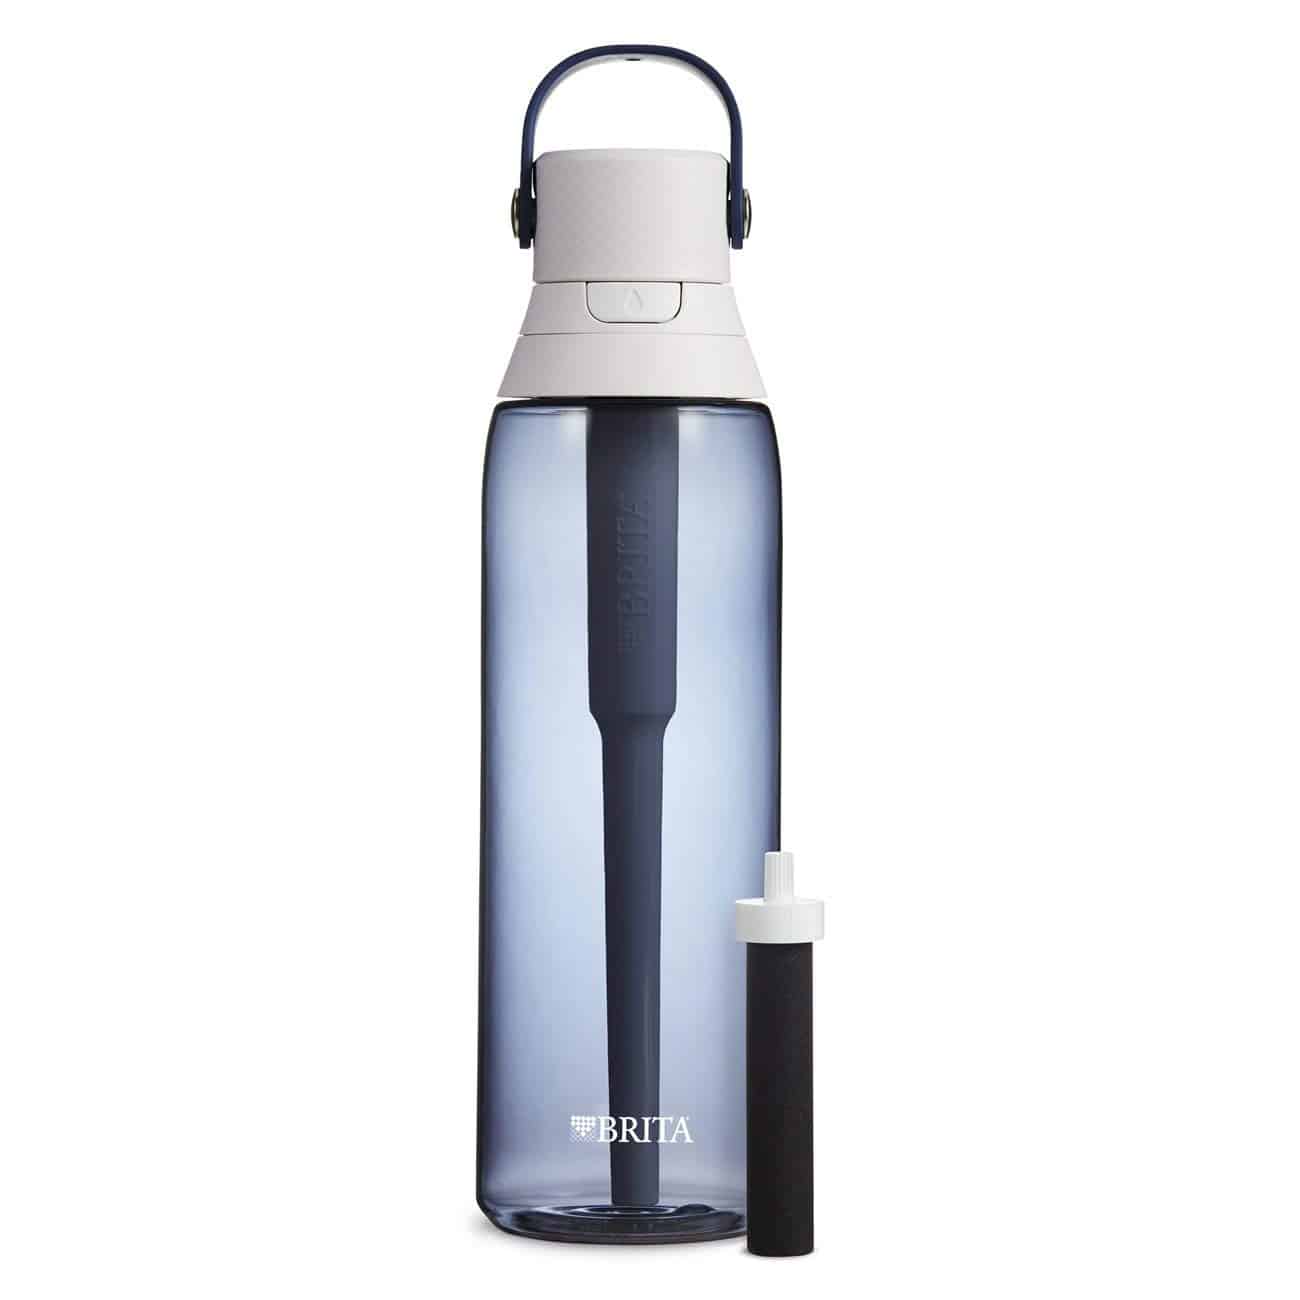 Amazon.com_-Brita-26-Ounce-Premium-Filtering-Water-Bottle-with-Filter-BPA-Free